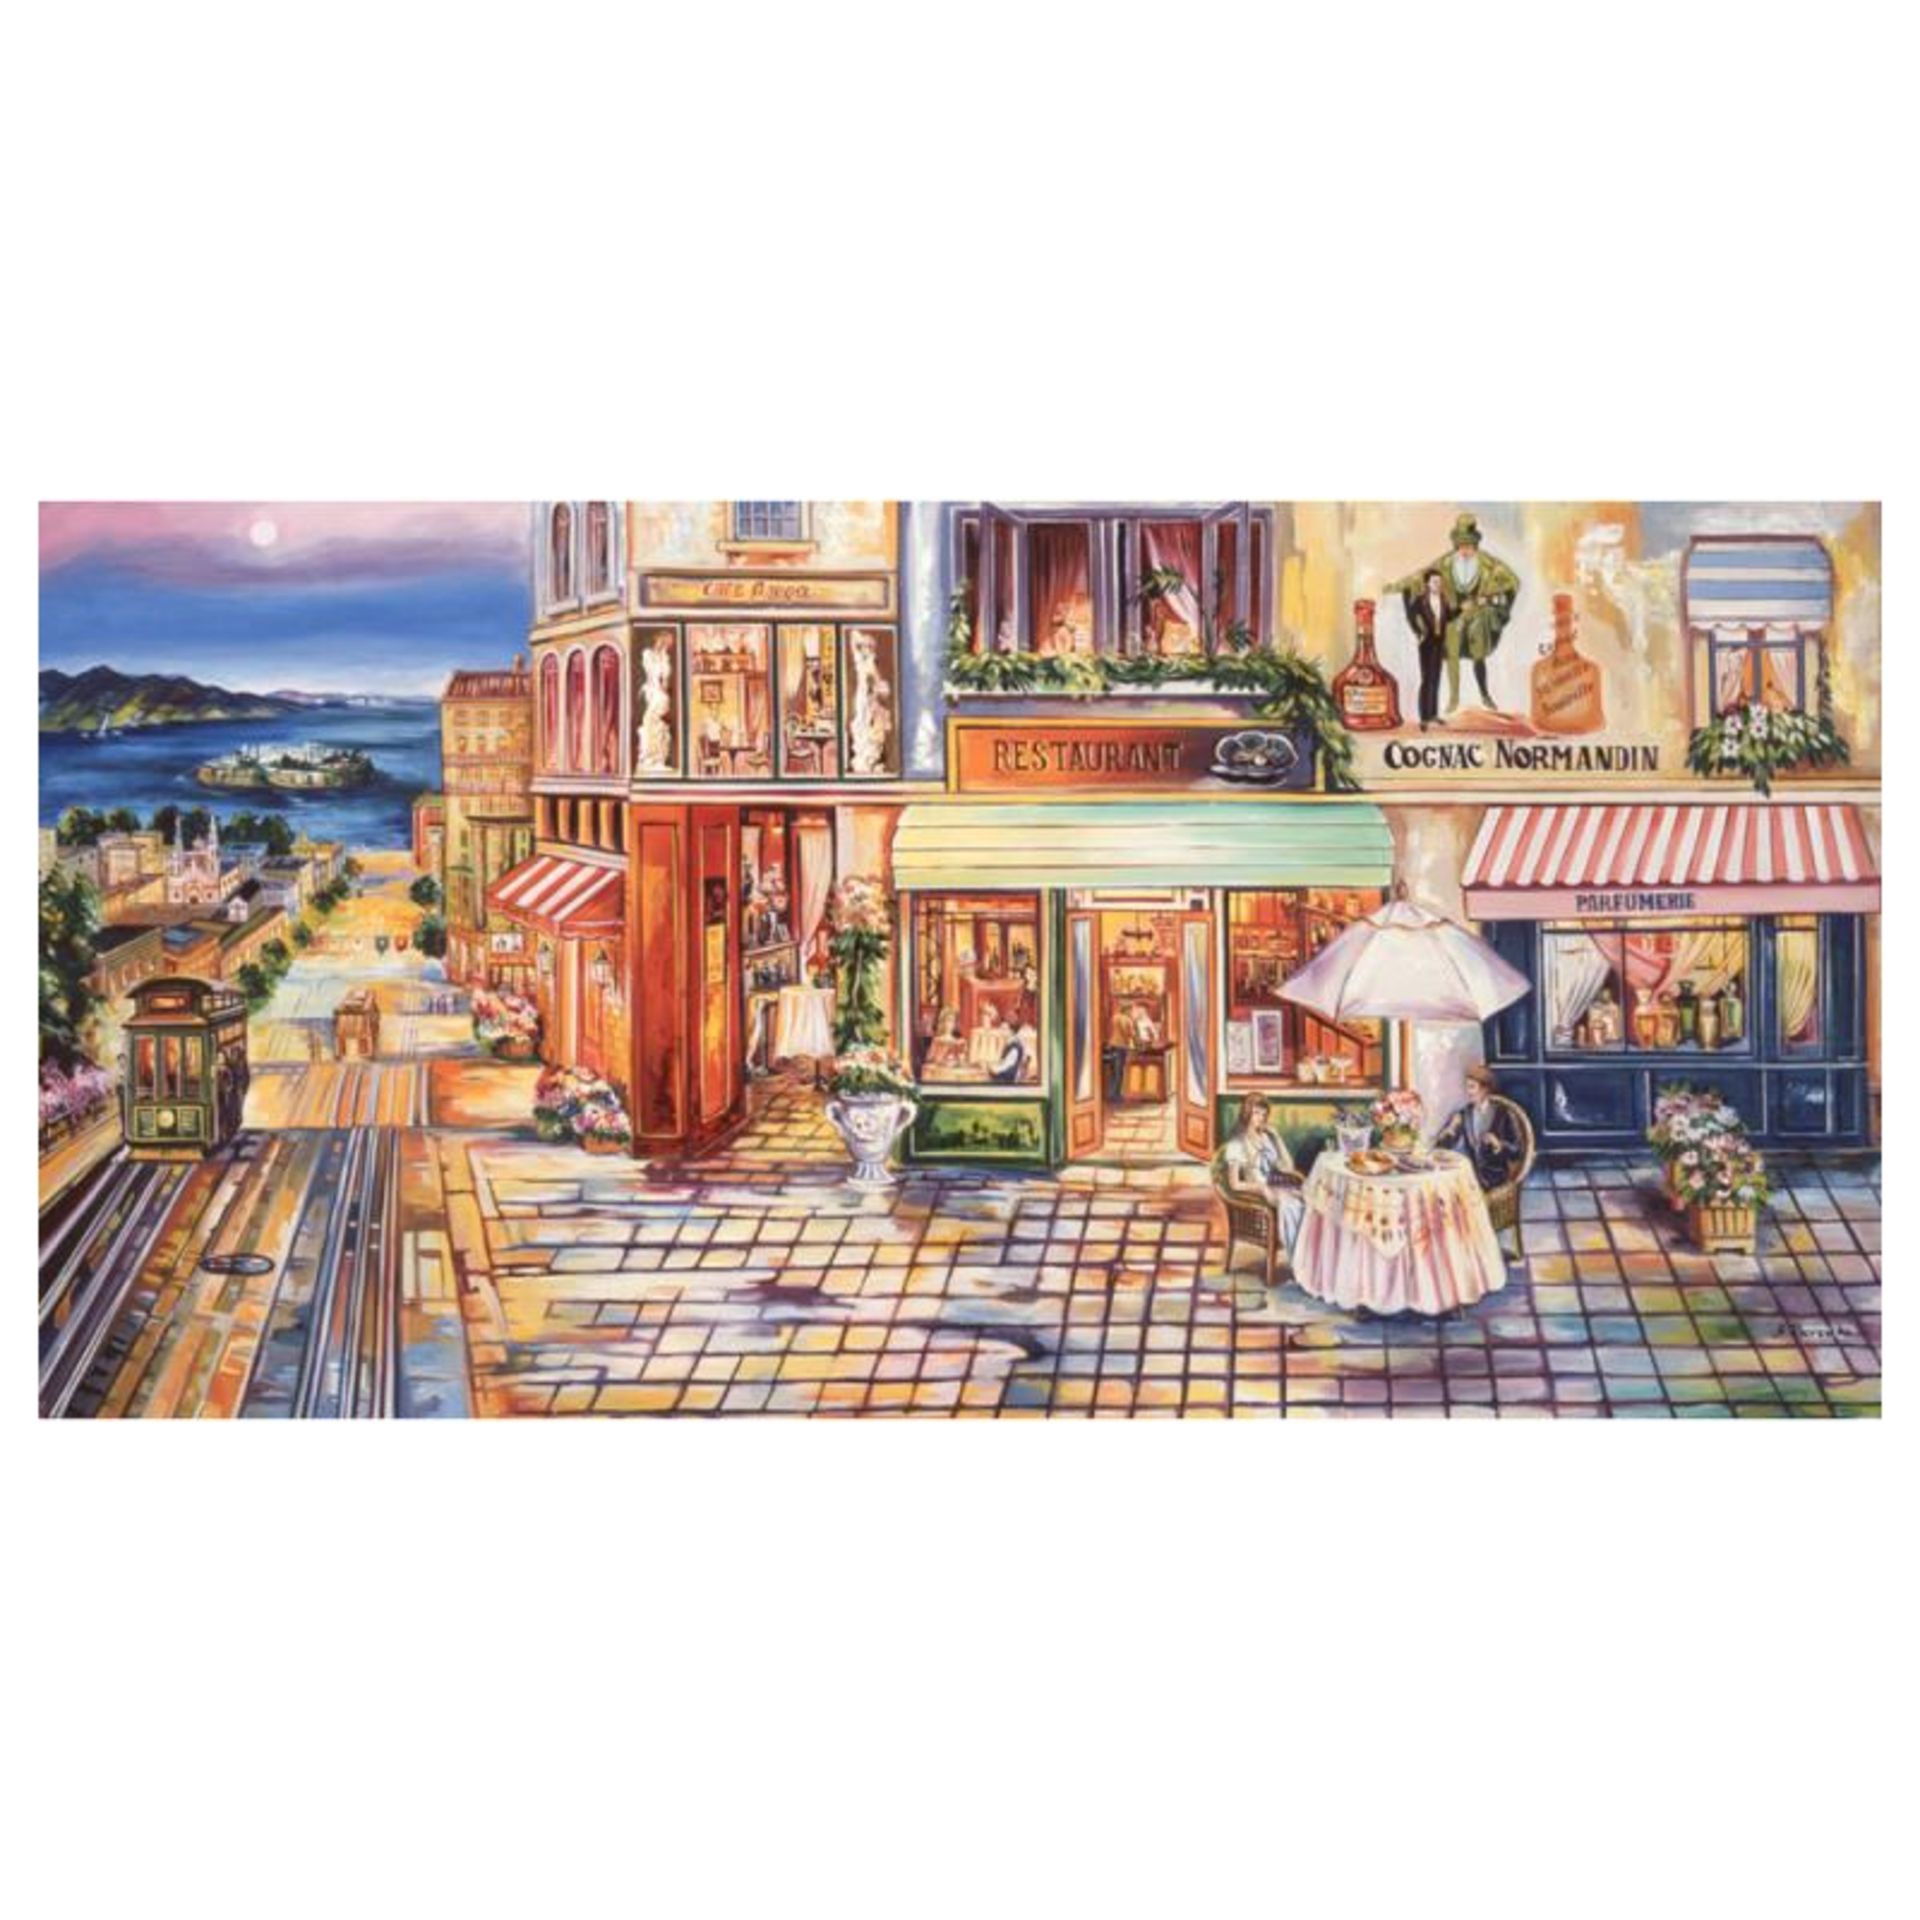 Alexander Borewko, "Pedestrian Mall" Hand Signed Limited Edition Giclee on Canva